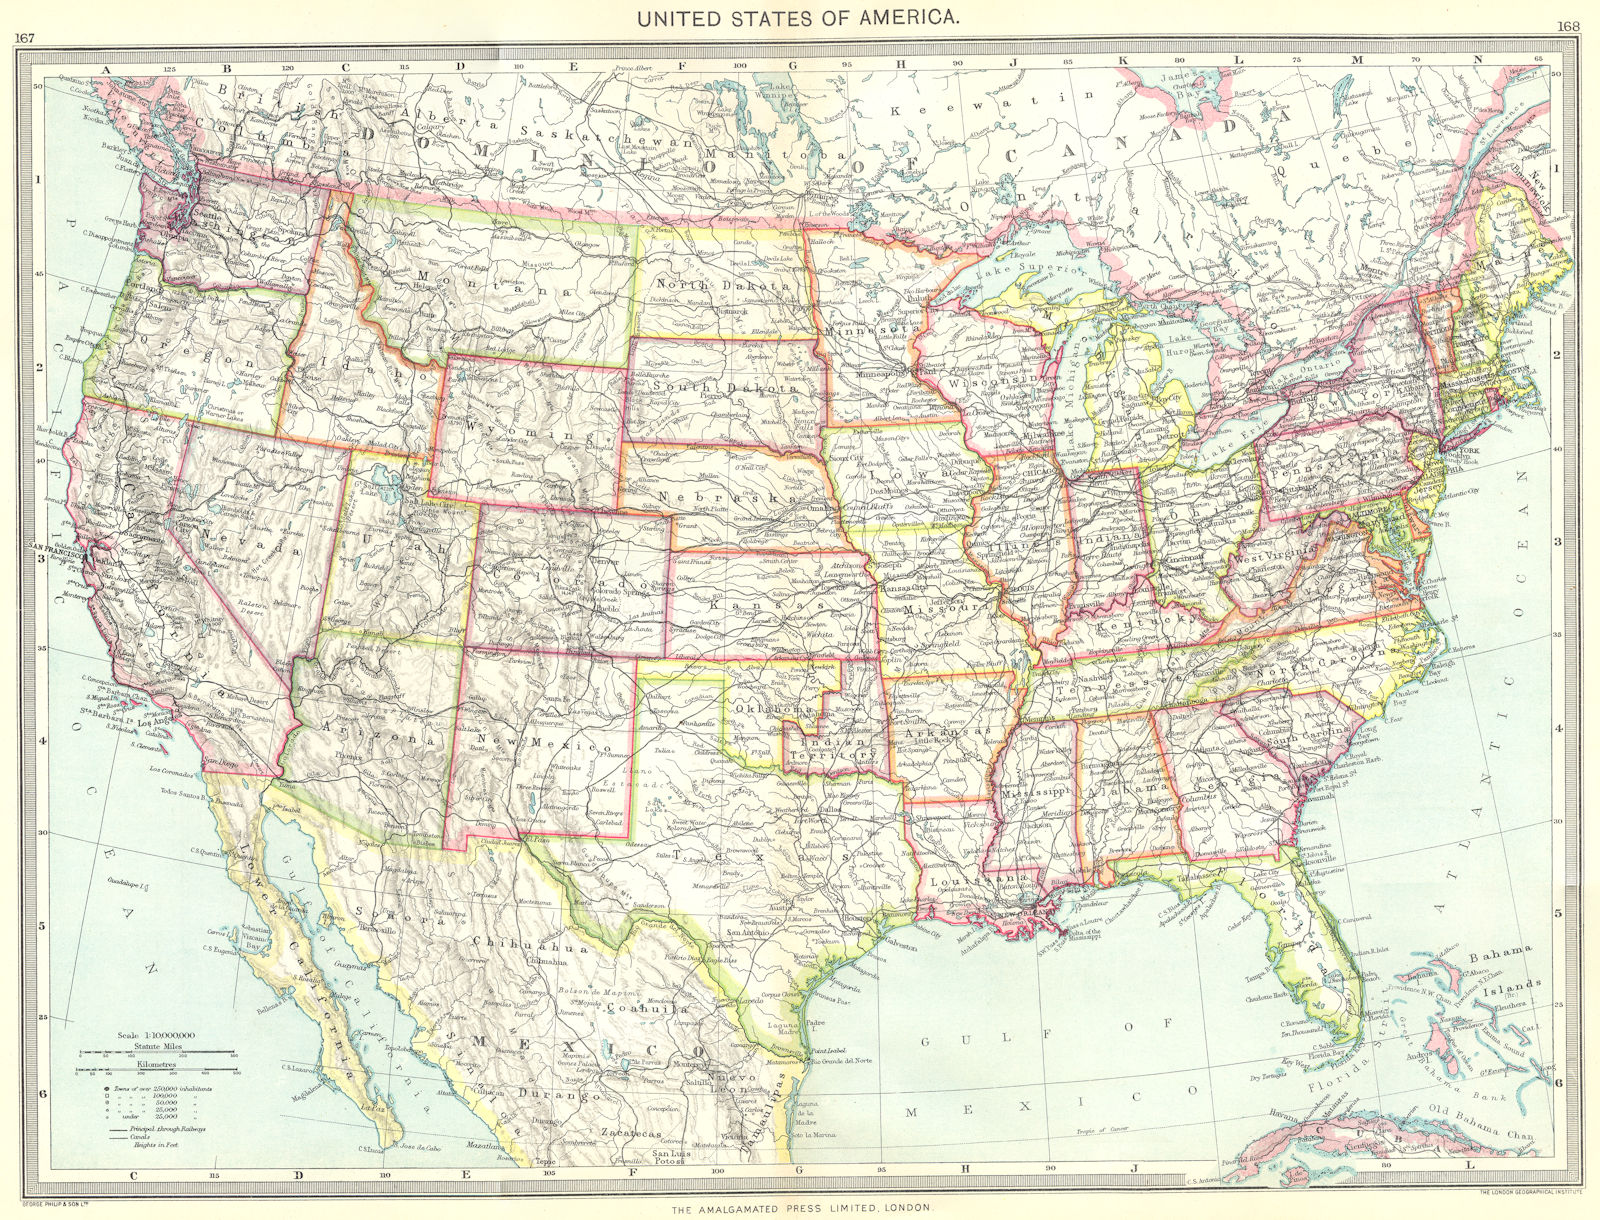 USA. United States of America 1907 old antique vintage map plan chart